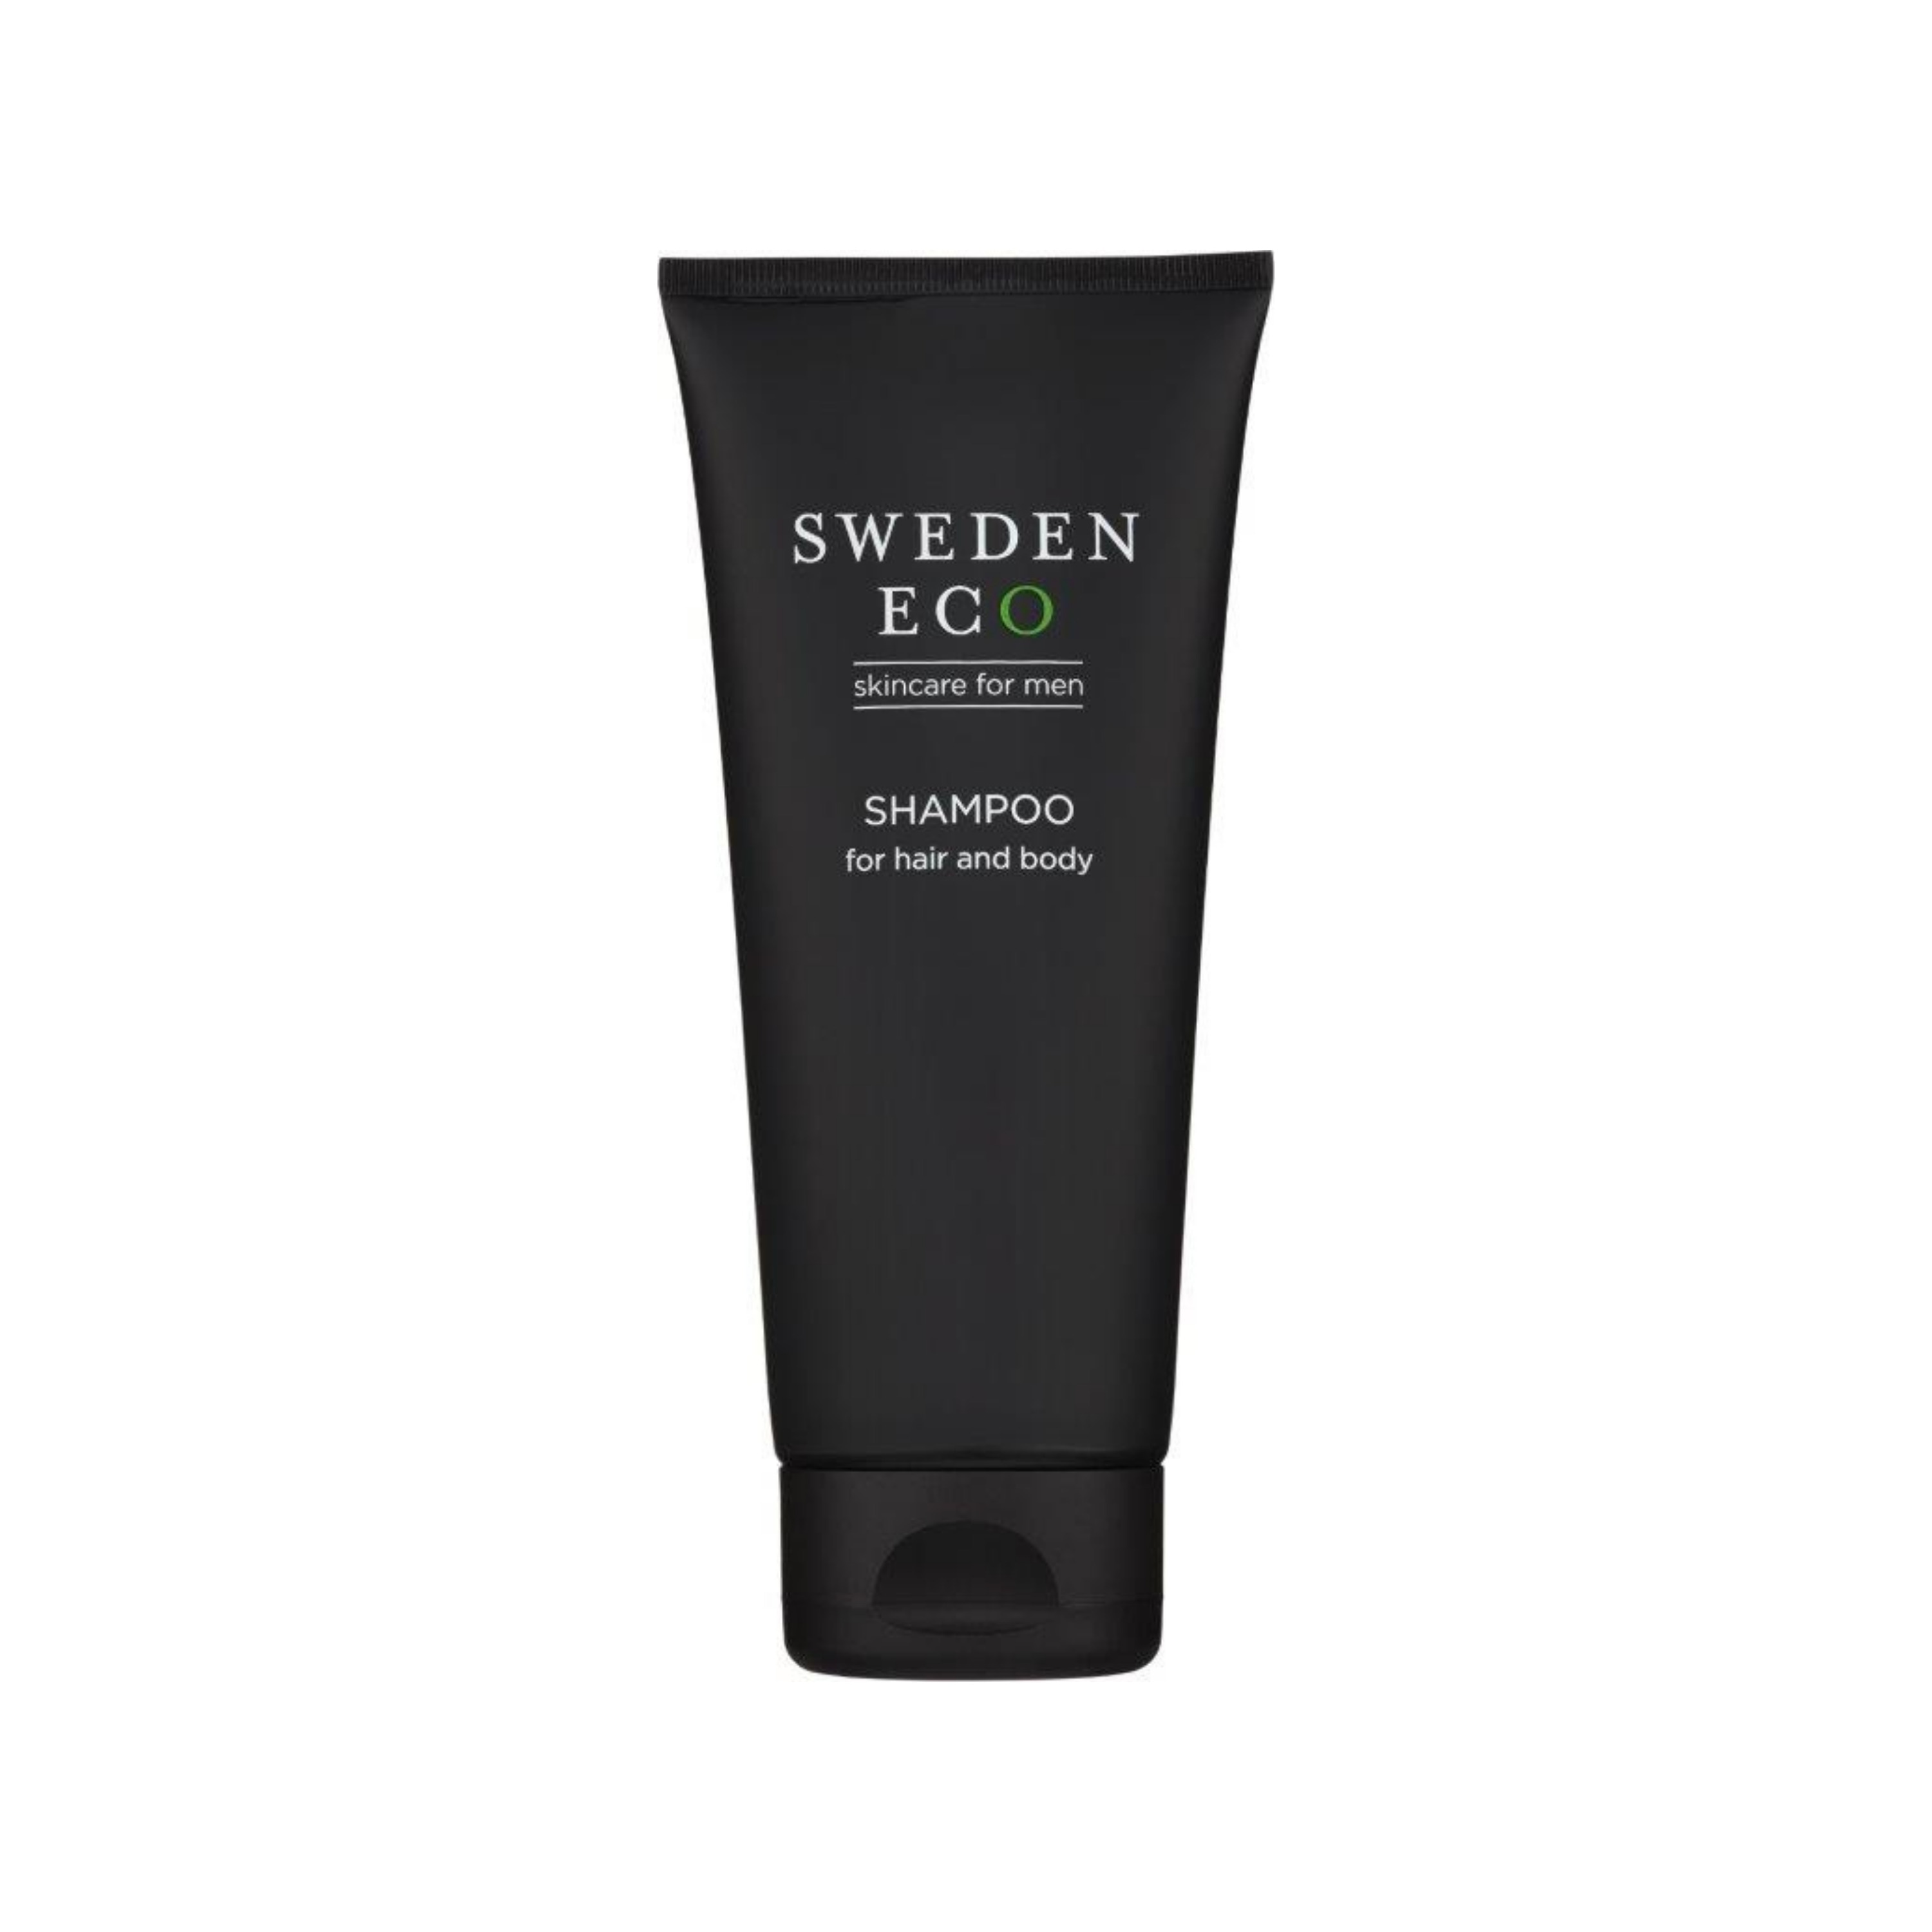 Sweden Eco Shampoo for Hair and Body 200ml